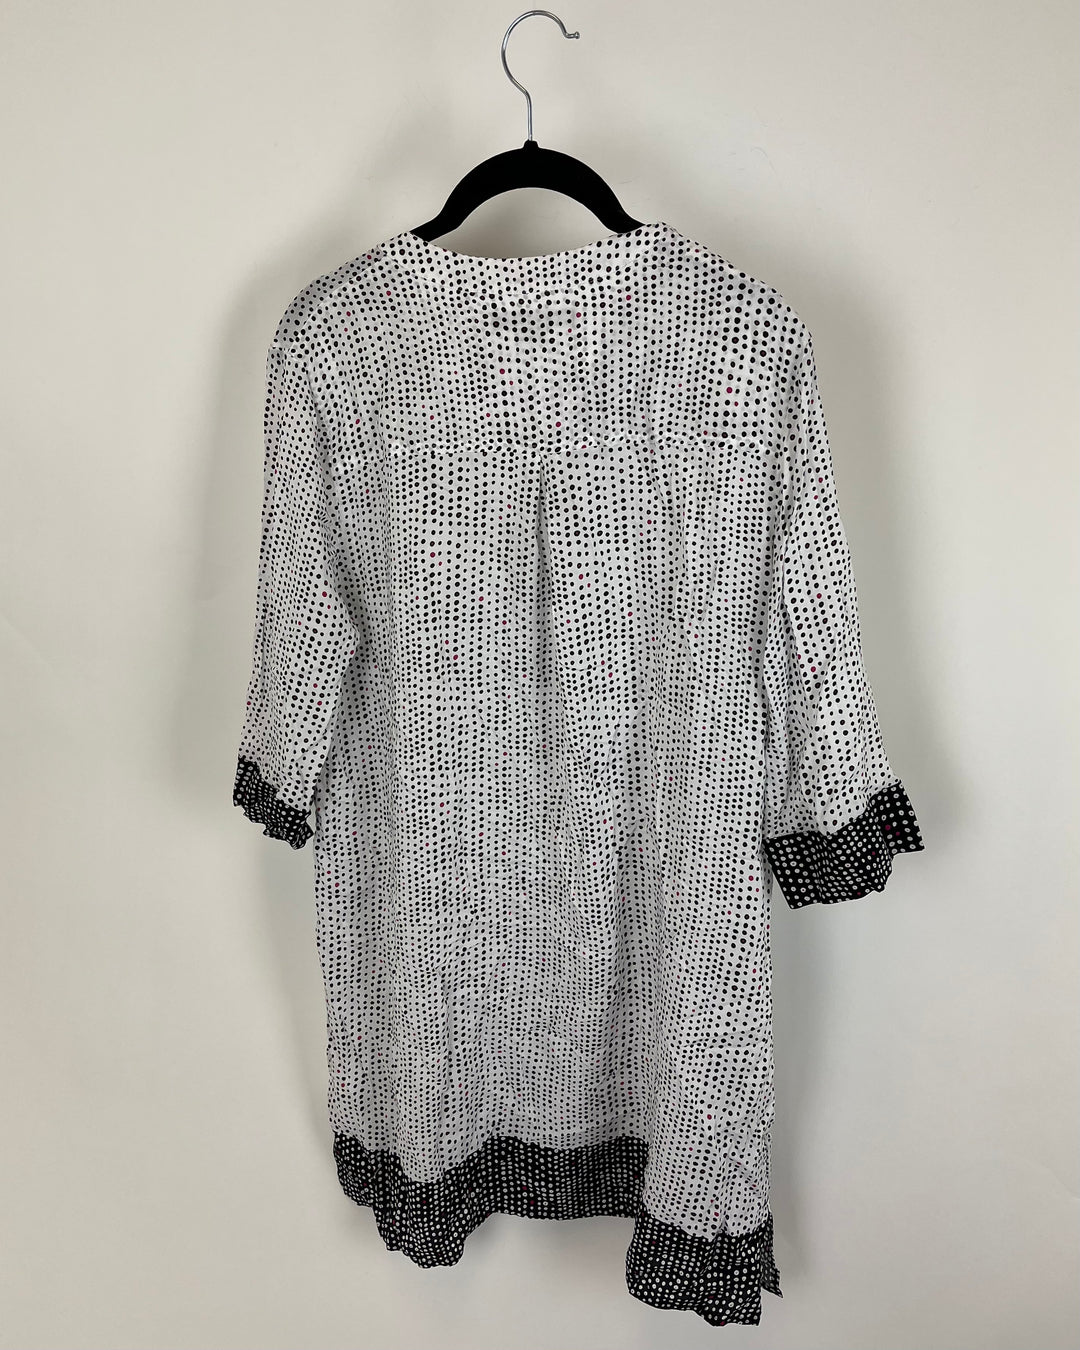 POLKA DOT BUTTON UP NIGHTGOWN - SMALL